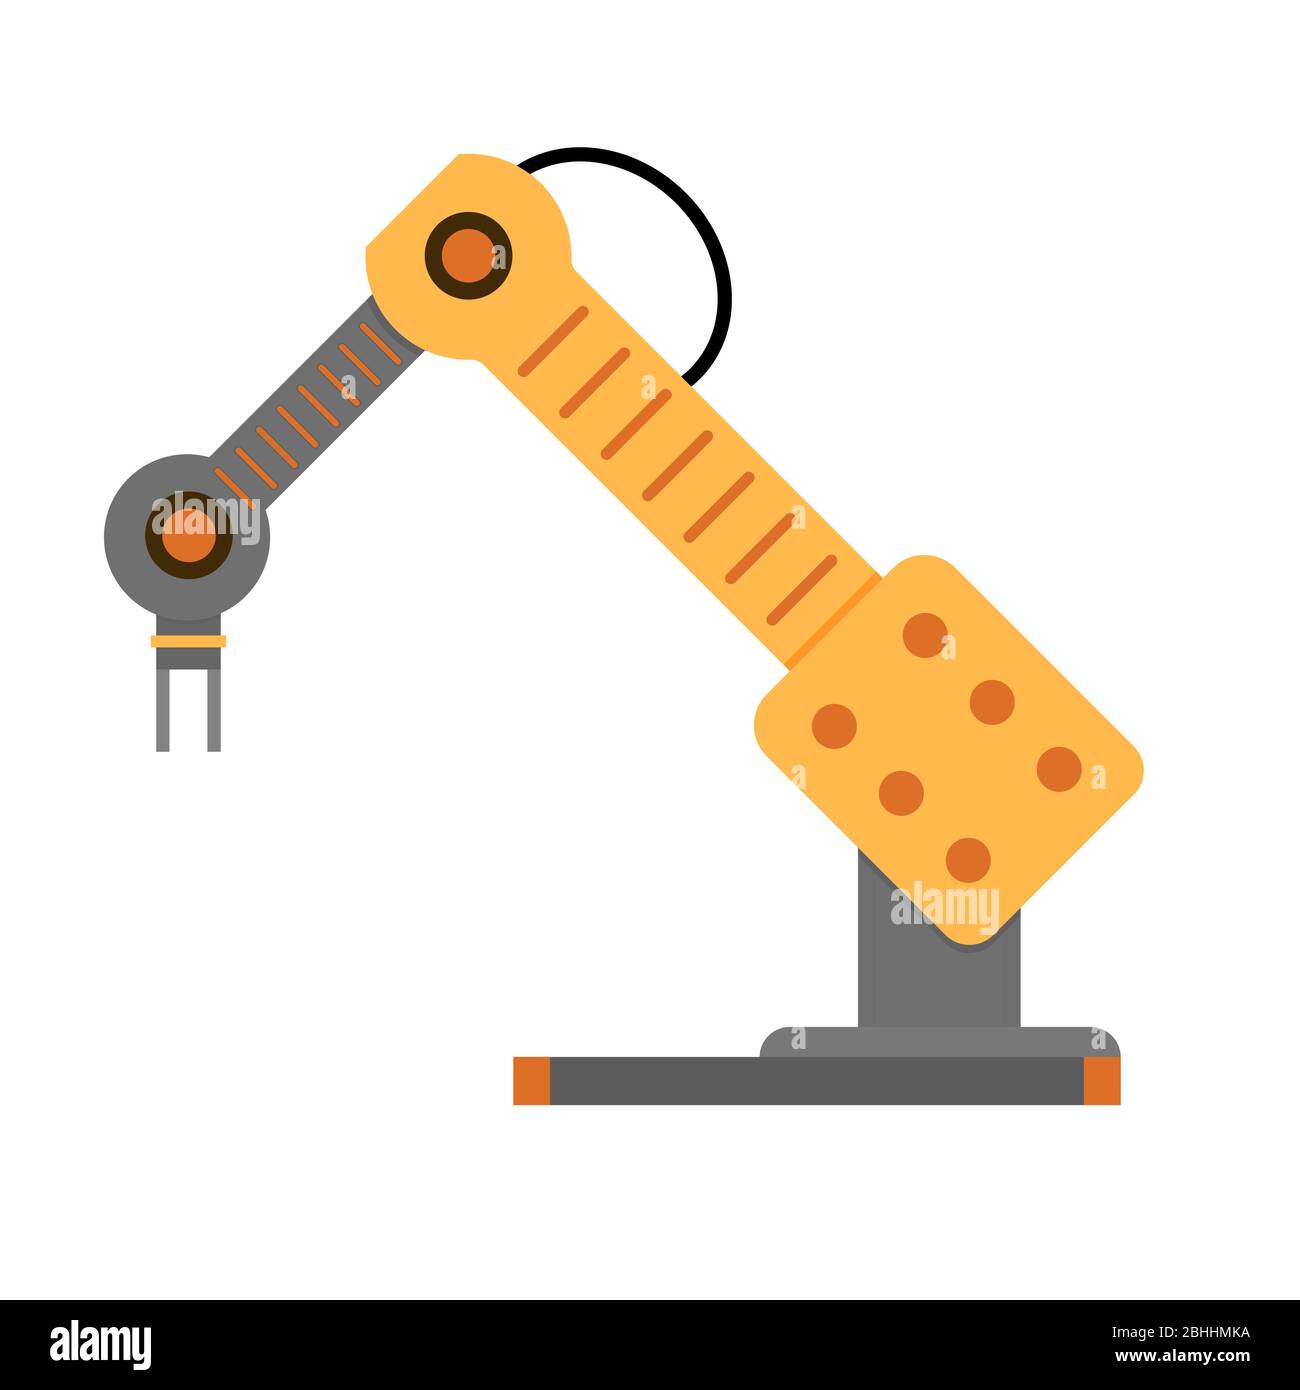 Mechanical equipment for assembly on conveyor belt. Mechanical operation, tech device, robotic machinery isolated. Vector illustration Stock Vector